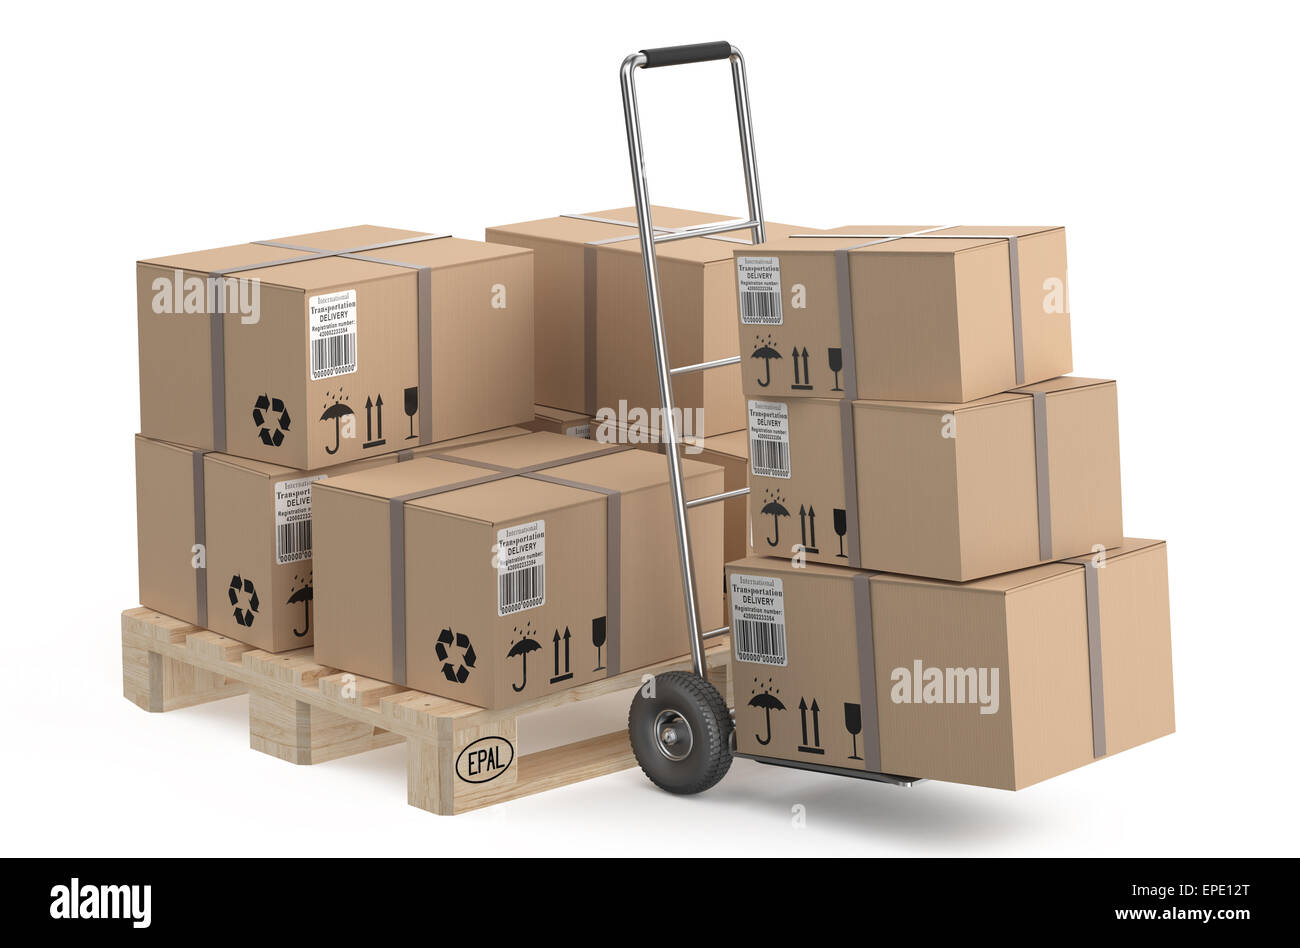 Cardboard boxes on pallet and hand truck Stock Photo